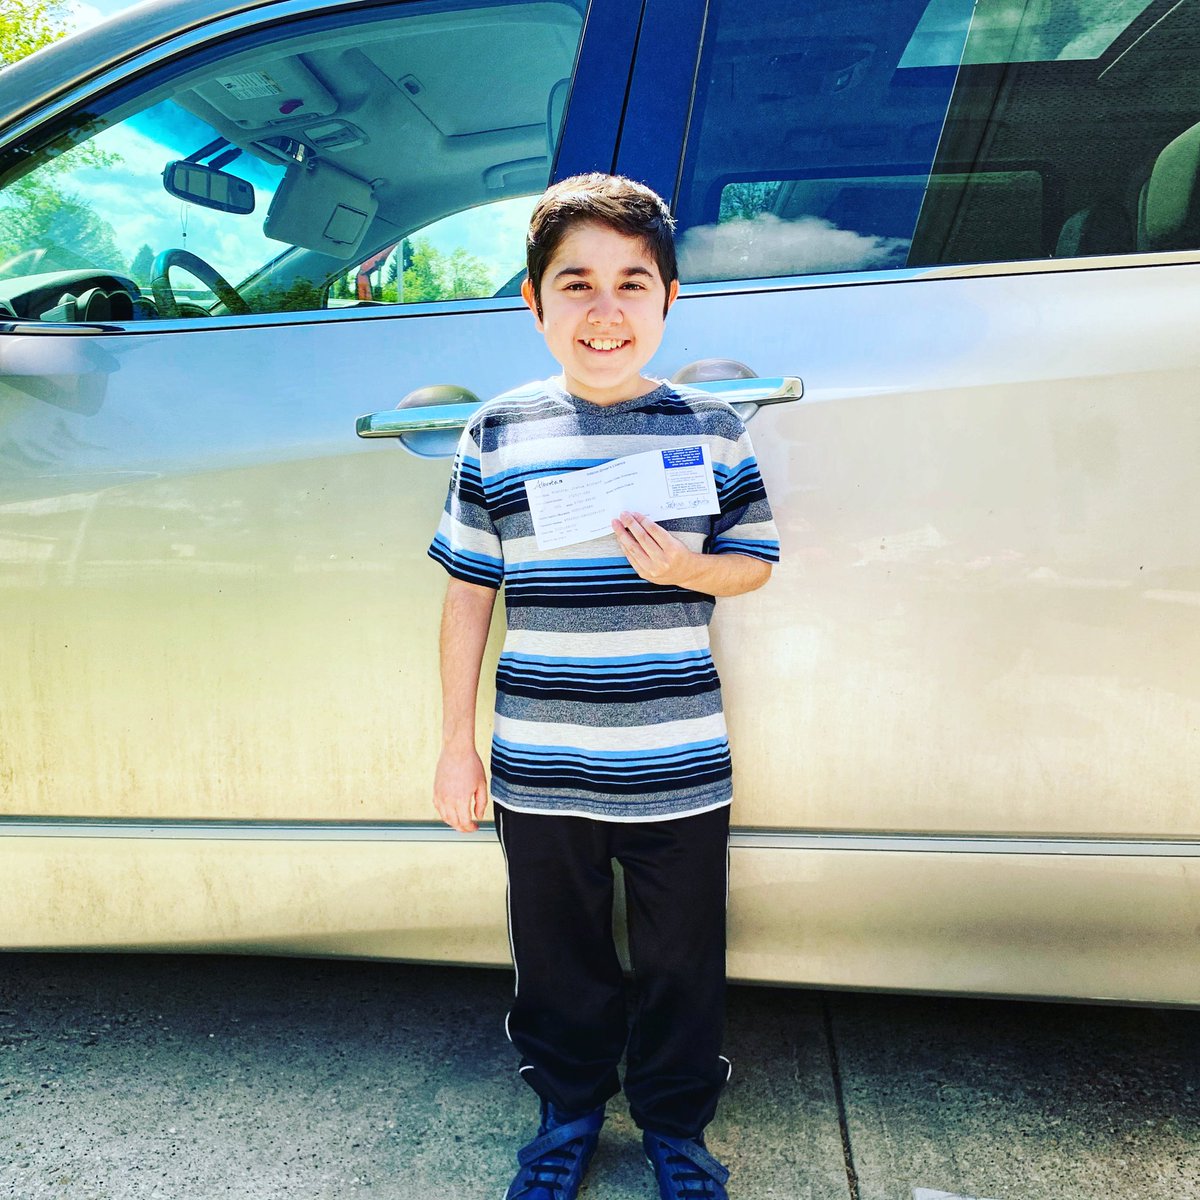 I finally got my learners license! I feel so independent now! #joshuavsduchenne #musculardystrophy #nolimits #duchennemusculardystrophy #LAPS4MD #StolleryChildrensHospital